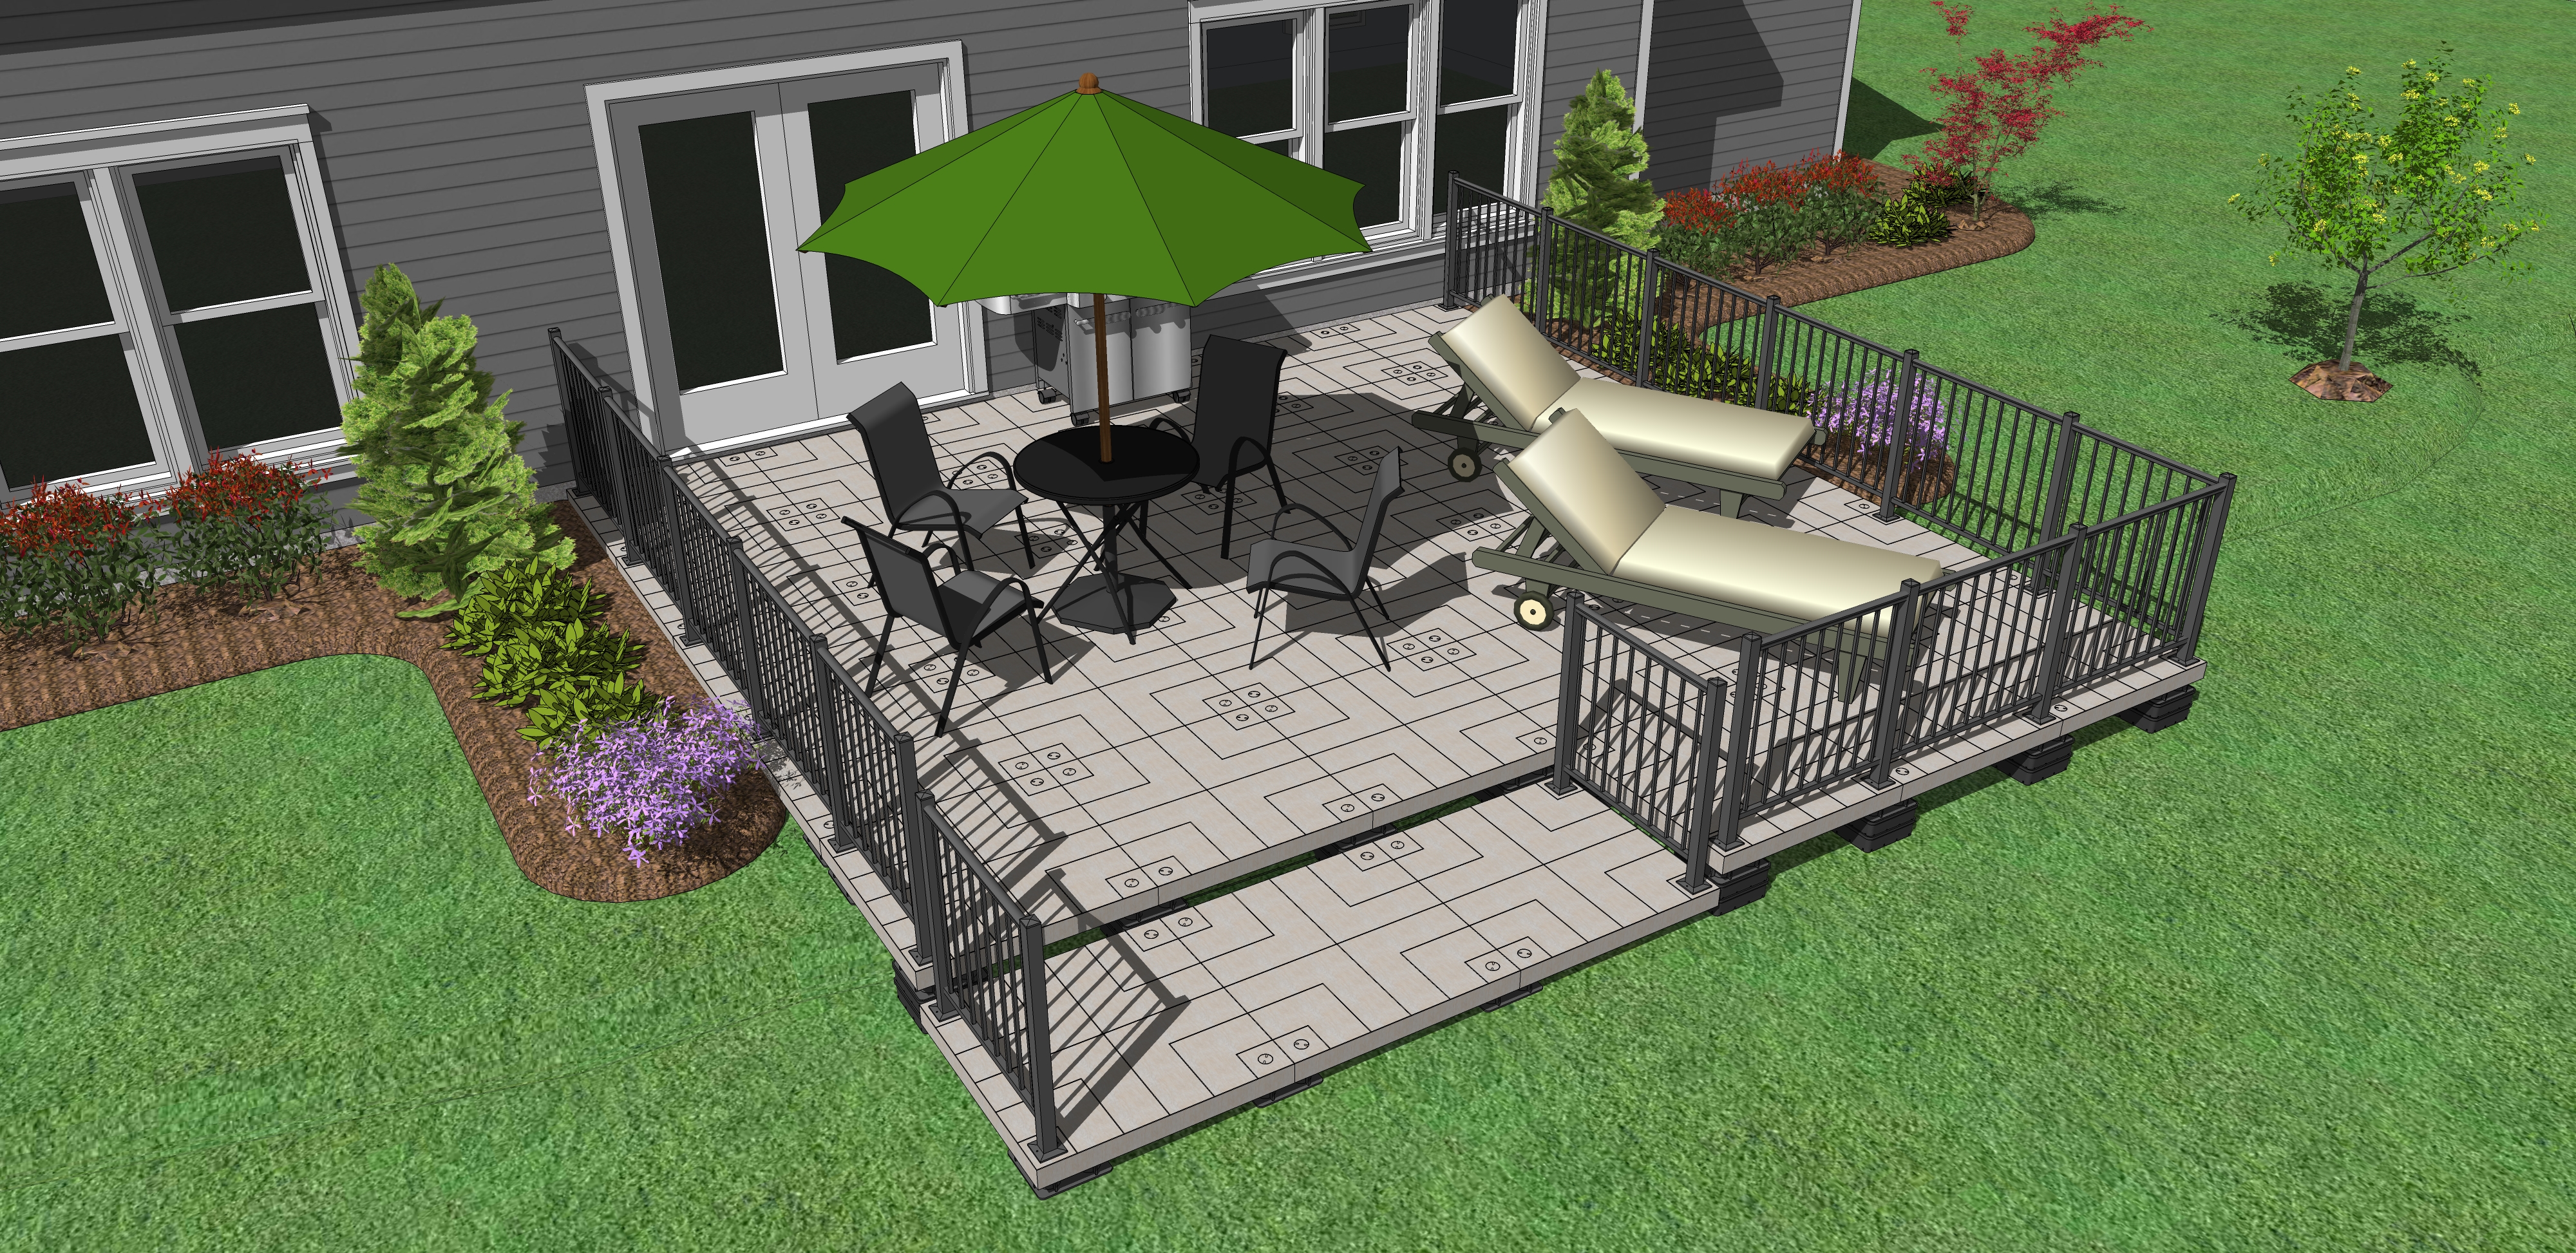 Large patio attached to the house with UDEX railing accessories